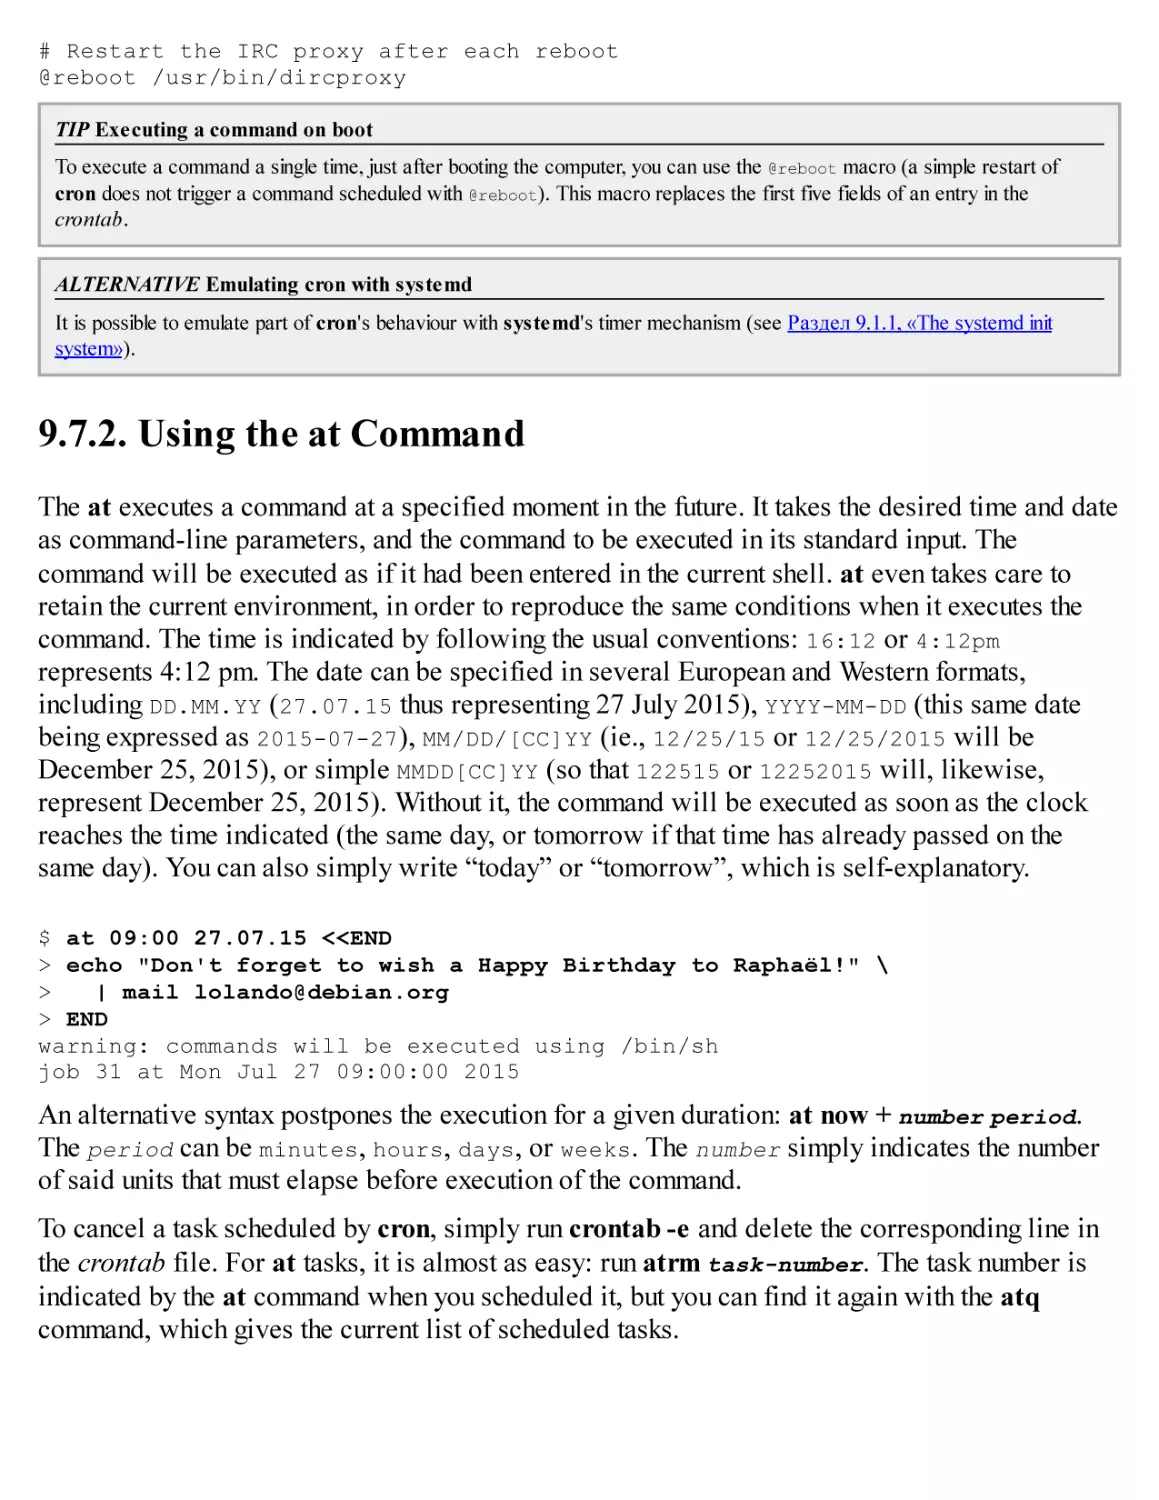 9.7.2. Using the at Command